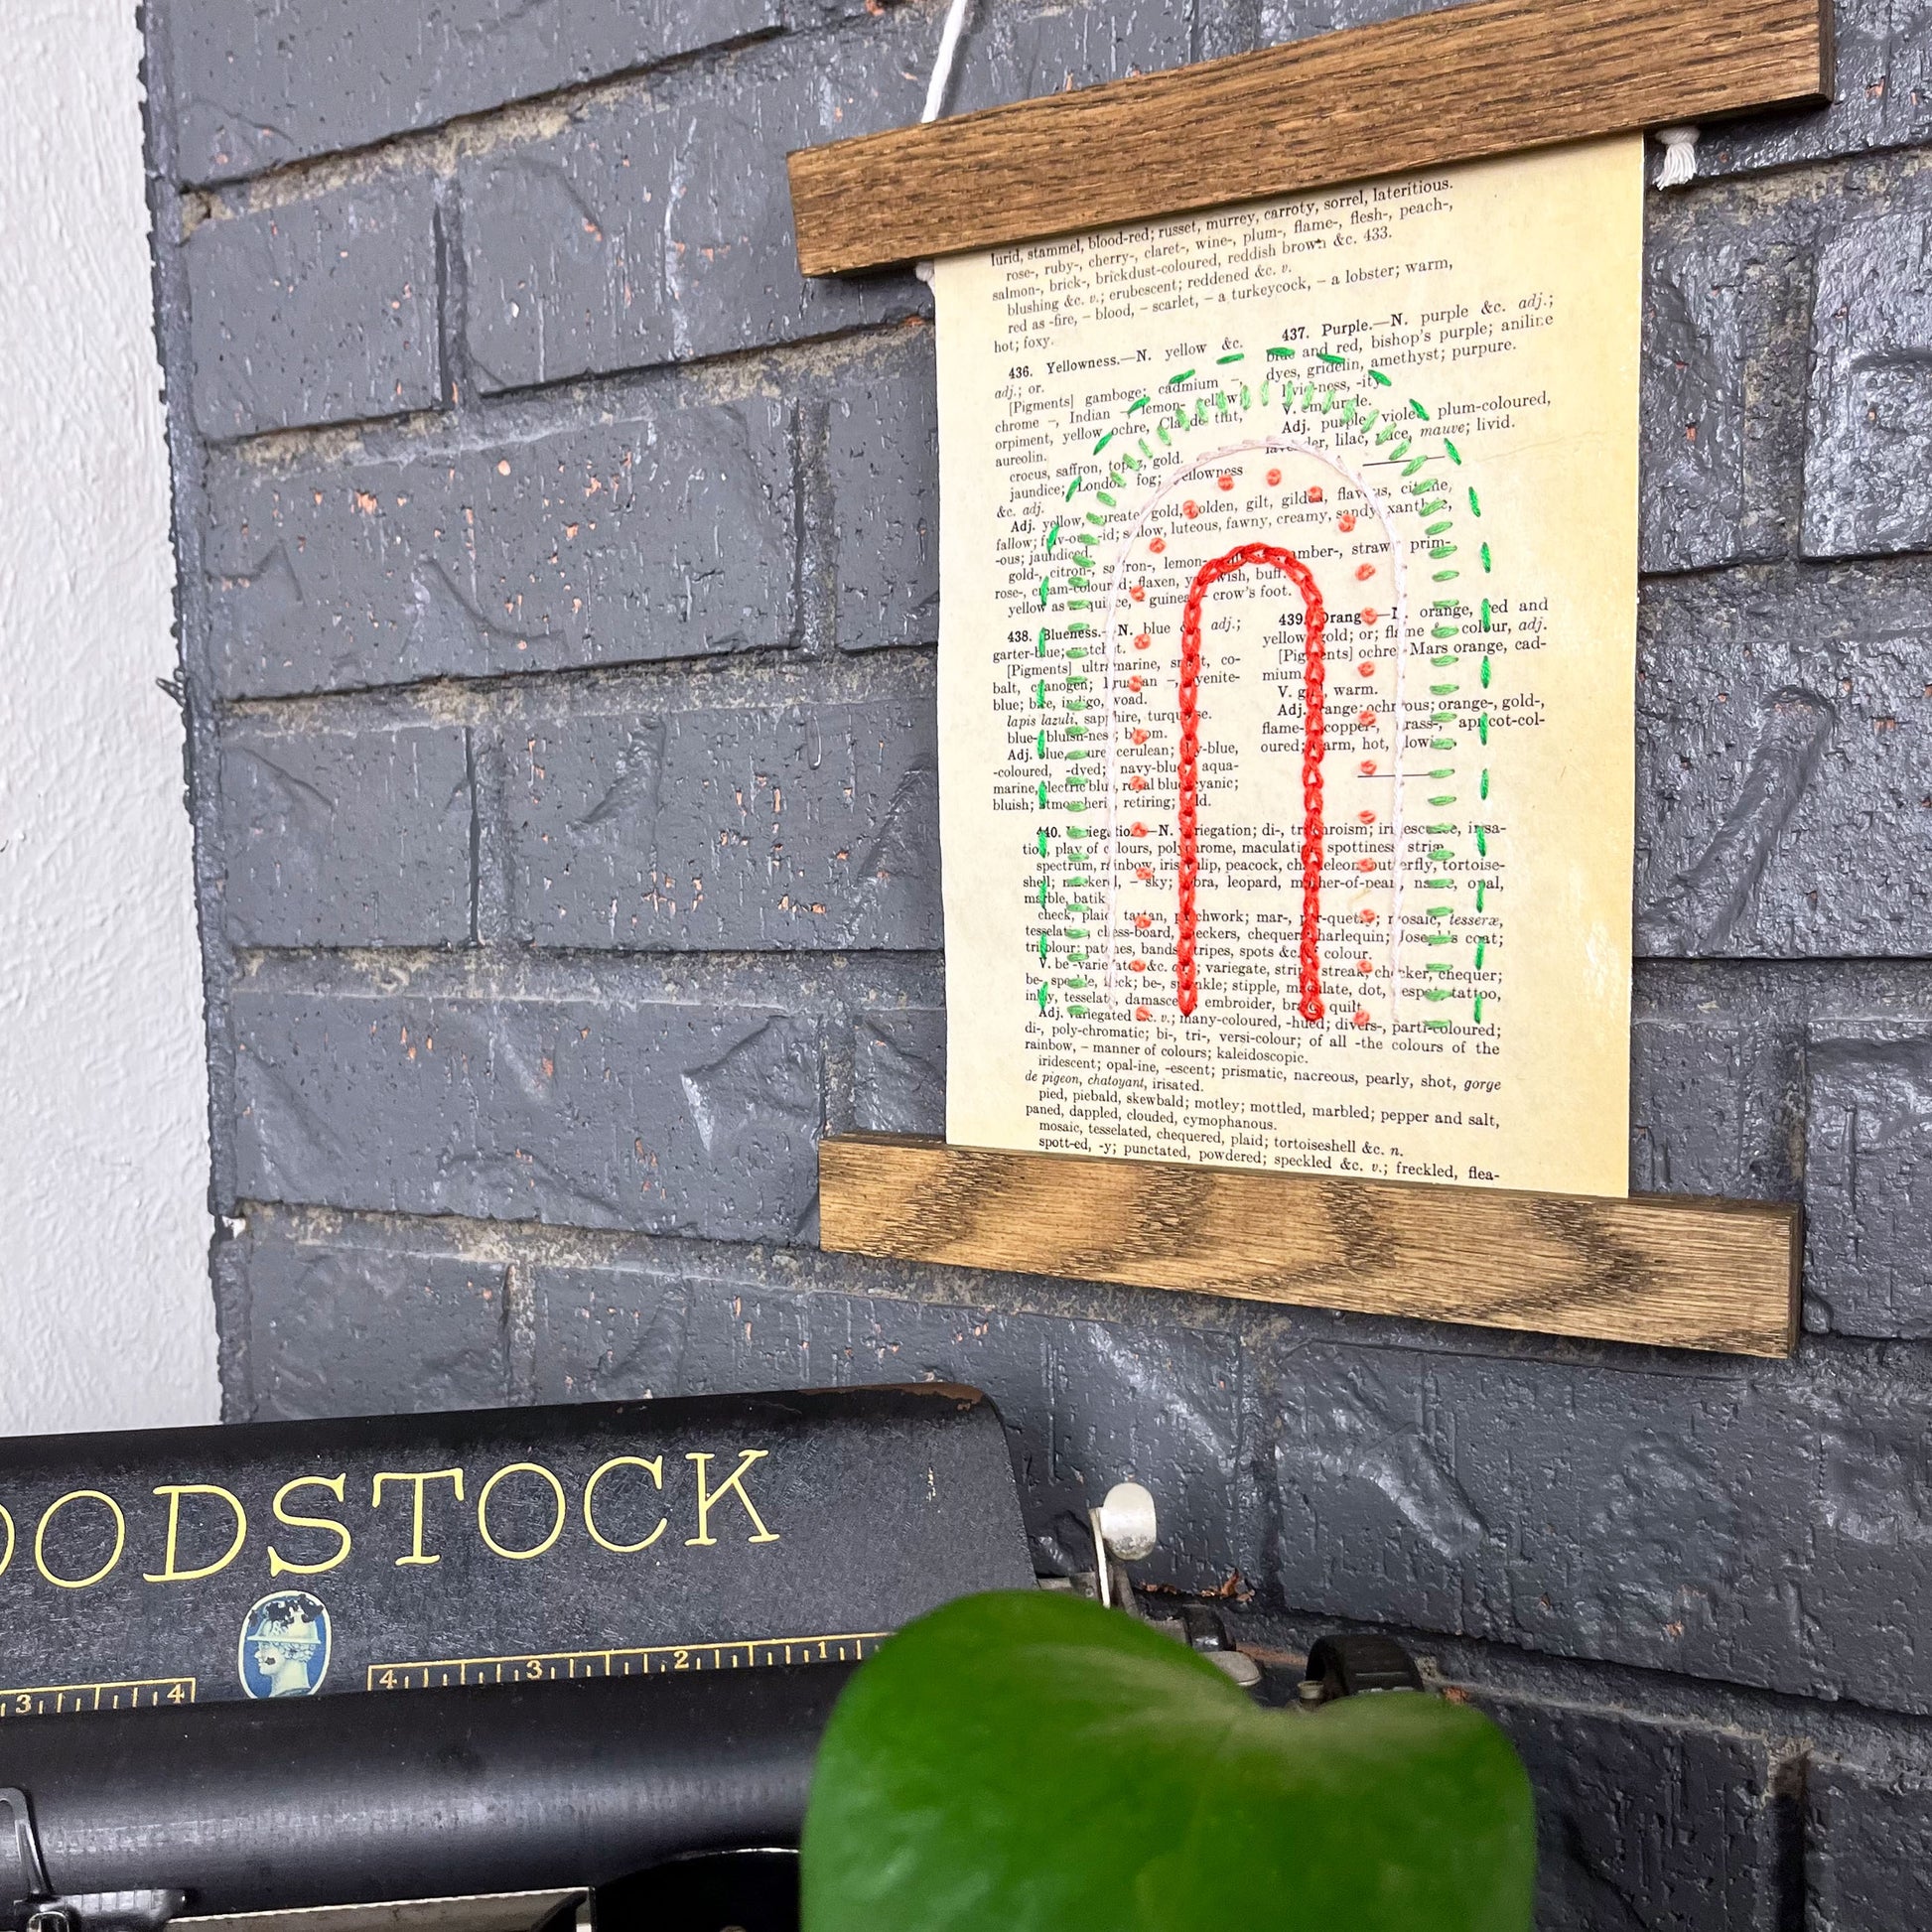 Vintage thesaurus page, embroidered with a rainbow in different types of stitches. Hanging in a magnetic wood frame on a grey brick wall, with the top of a typewriter and pothos plant peeking out at the bottom of the picture